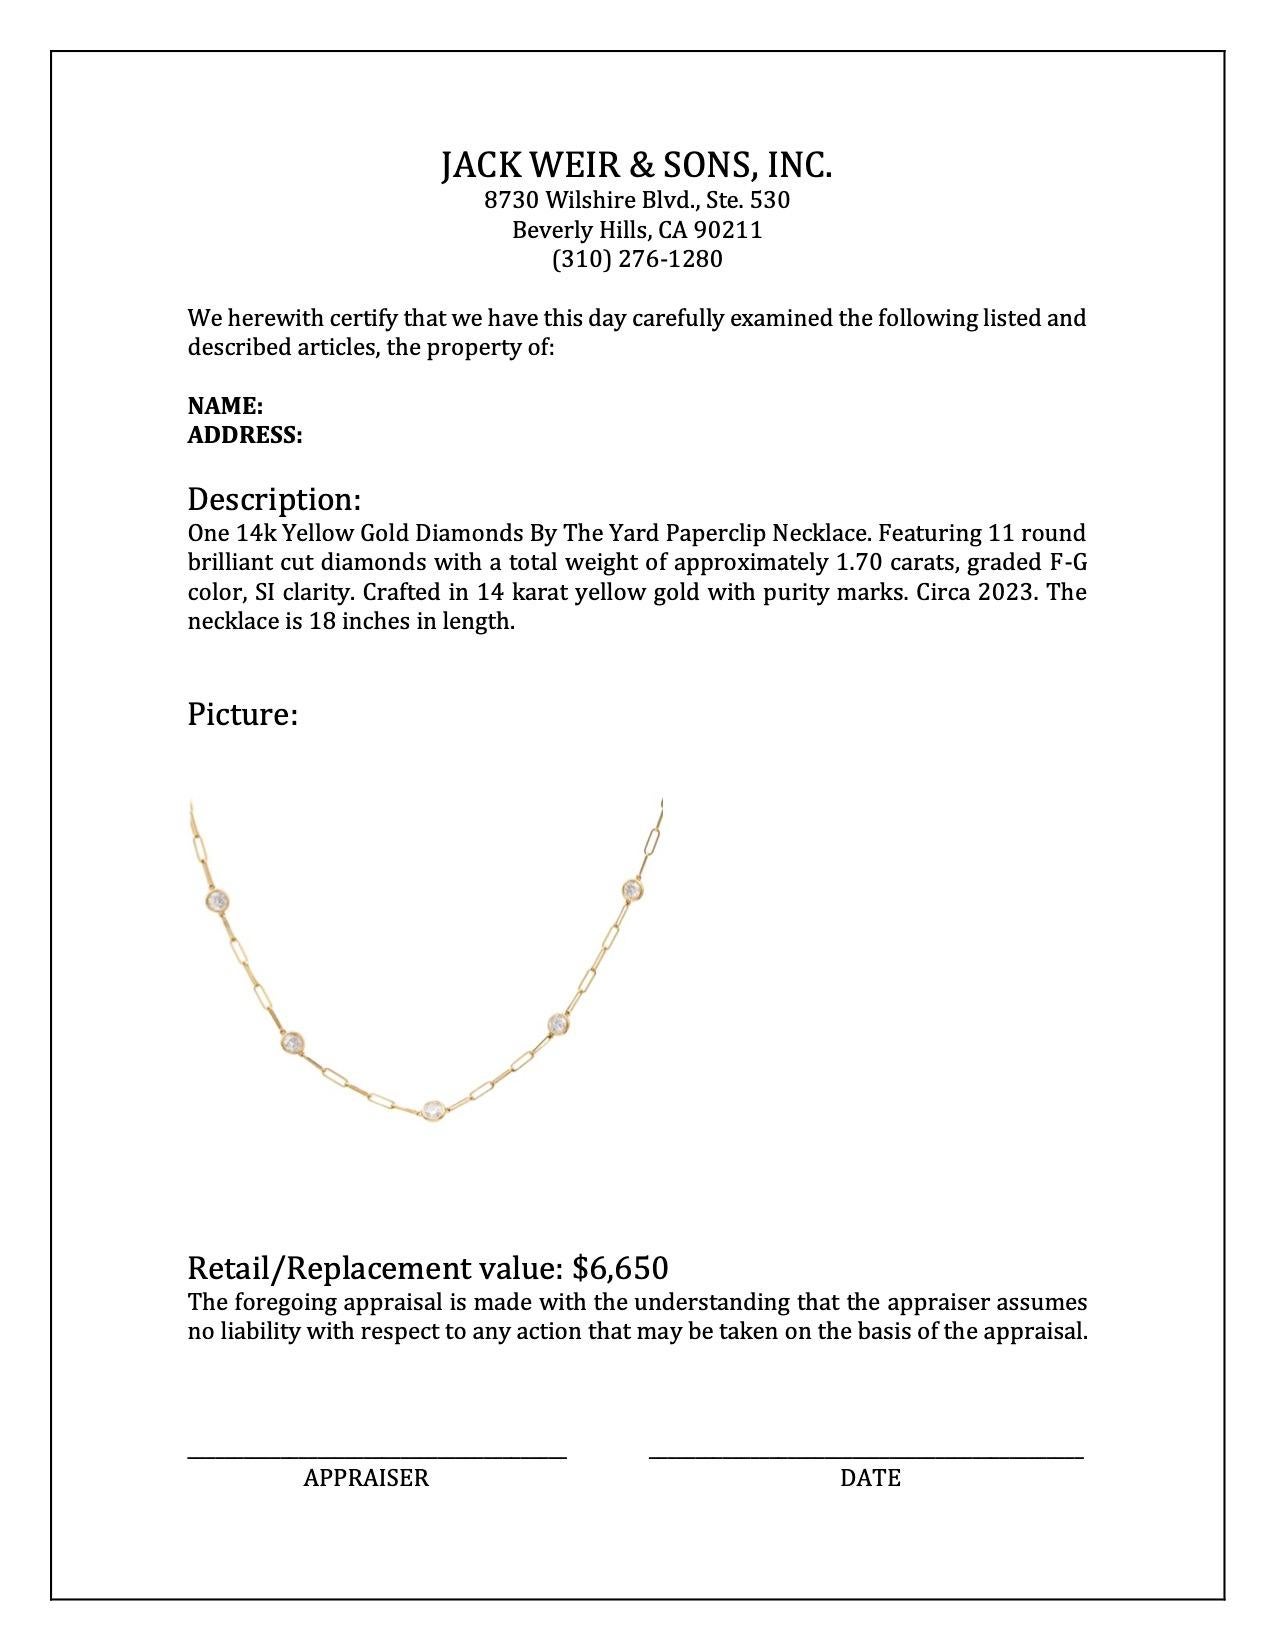 Women's or Men's 14k Yellow Gold Diamonds By The Yard Paperclip Necklace For Sale